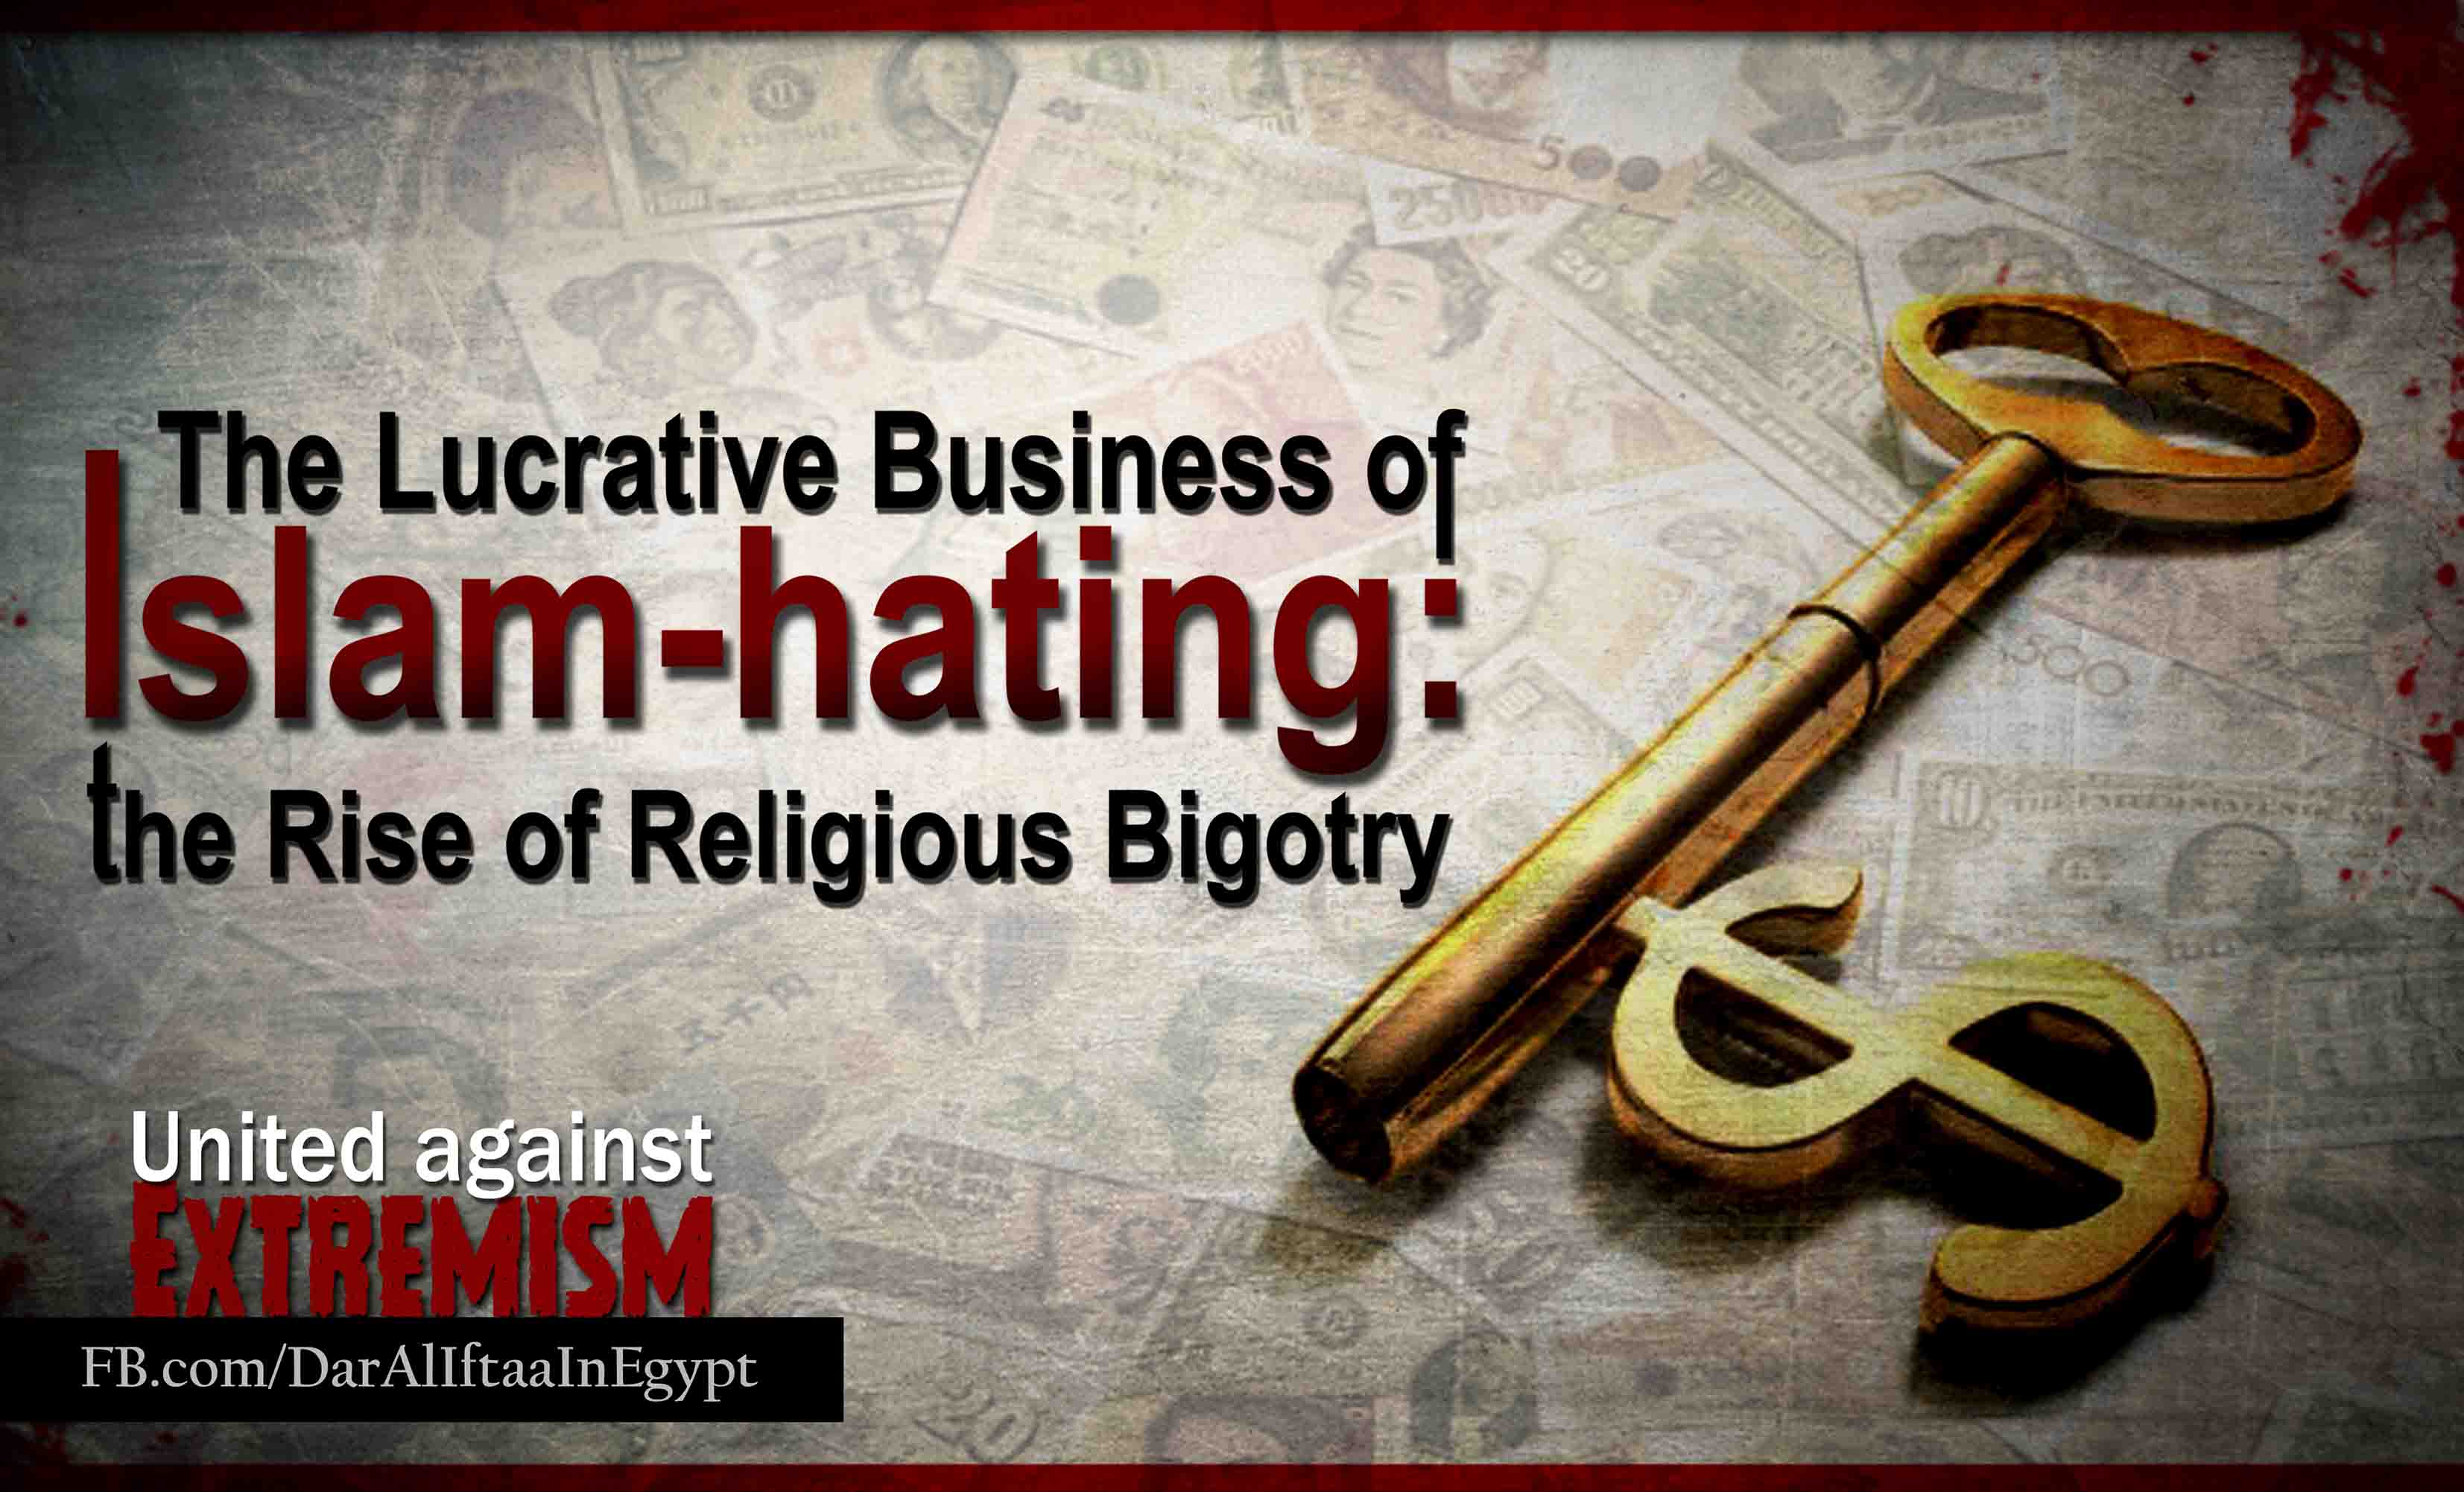 The Lucrative Business of Islam- hating: the Rise of Religious Bigotry